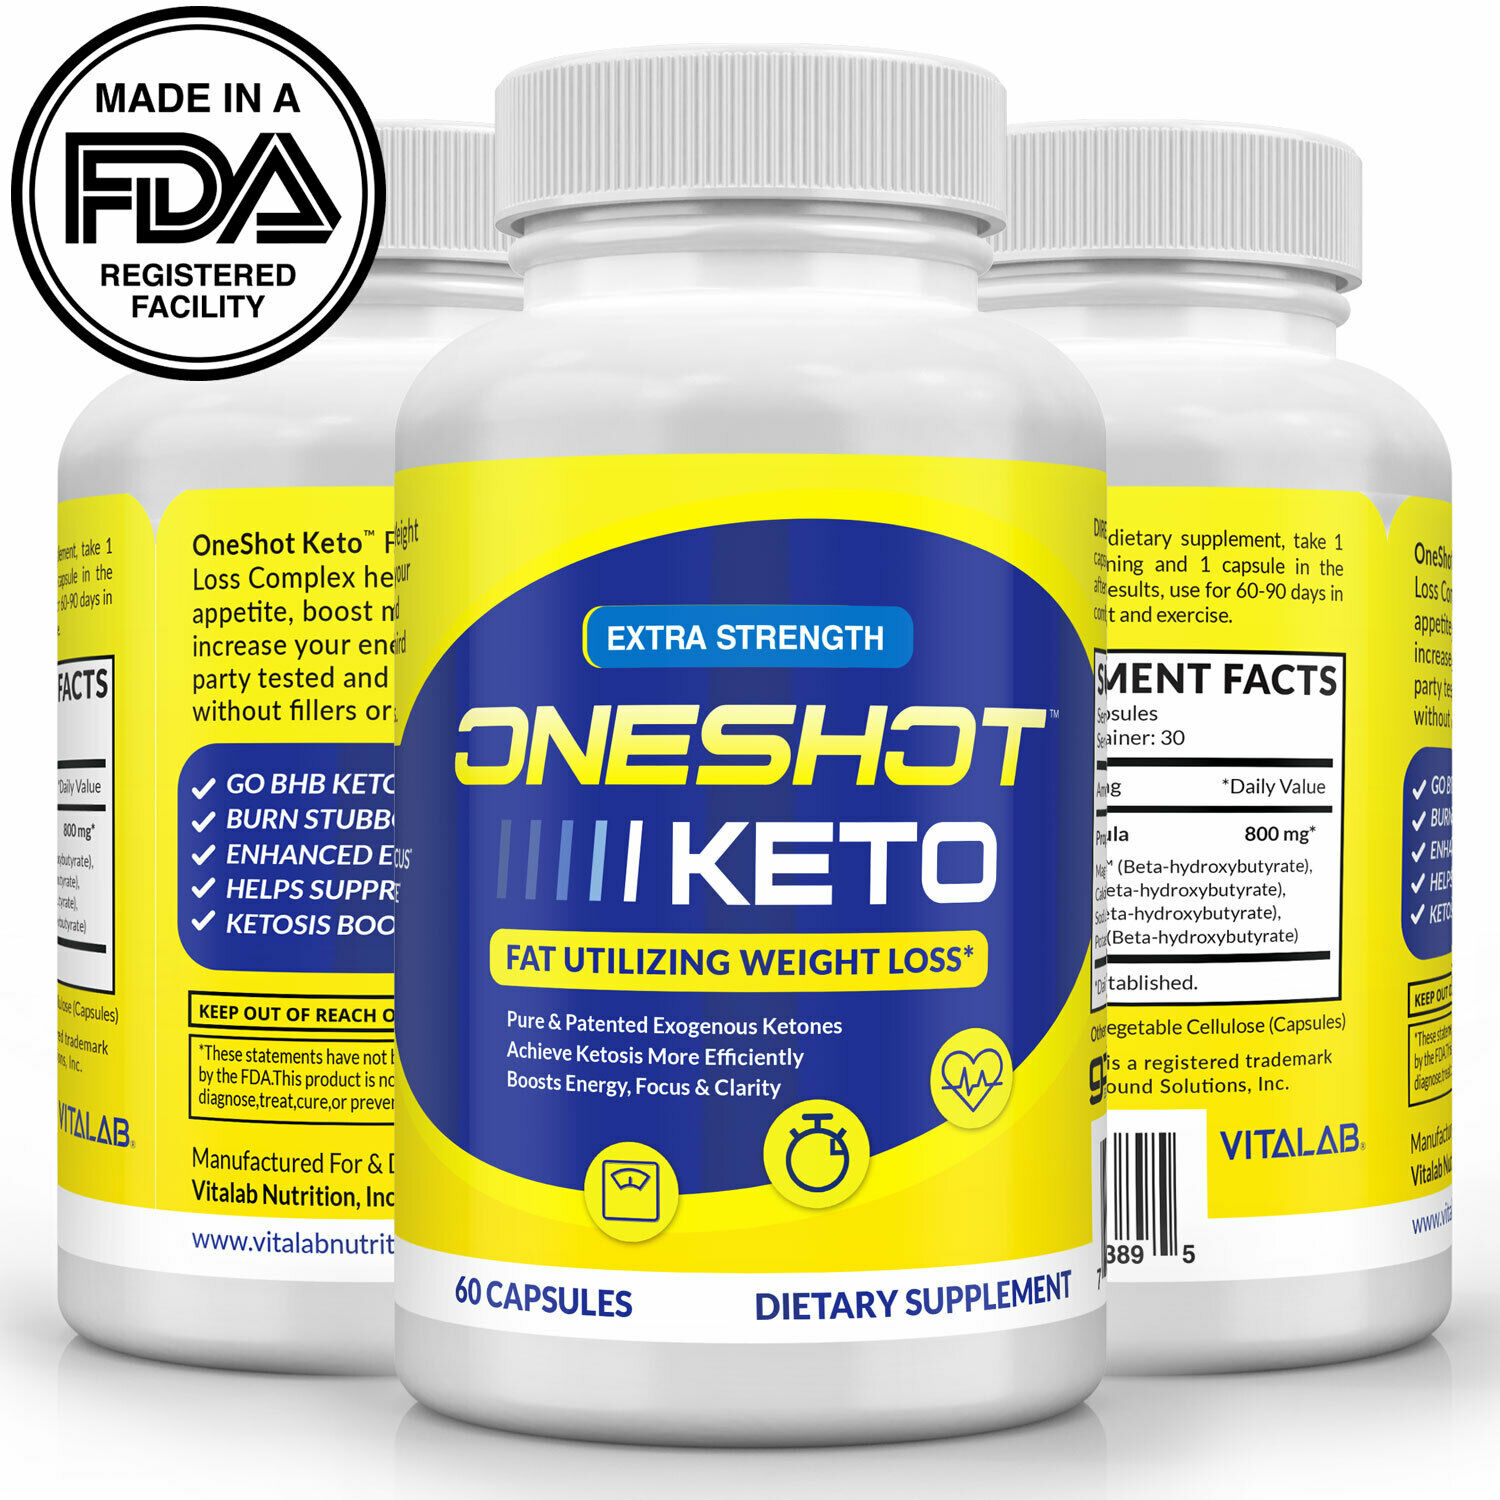 Official Keto One Shot Weight Loss Pills Supplement Keto Fat Burner 60 Capsules